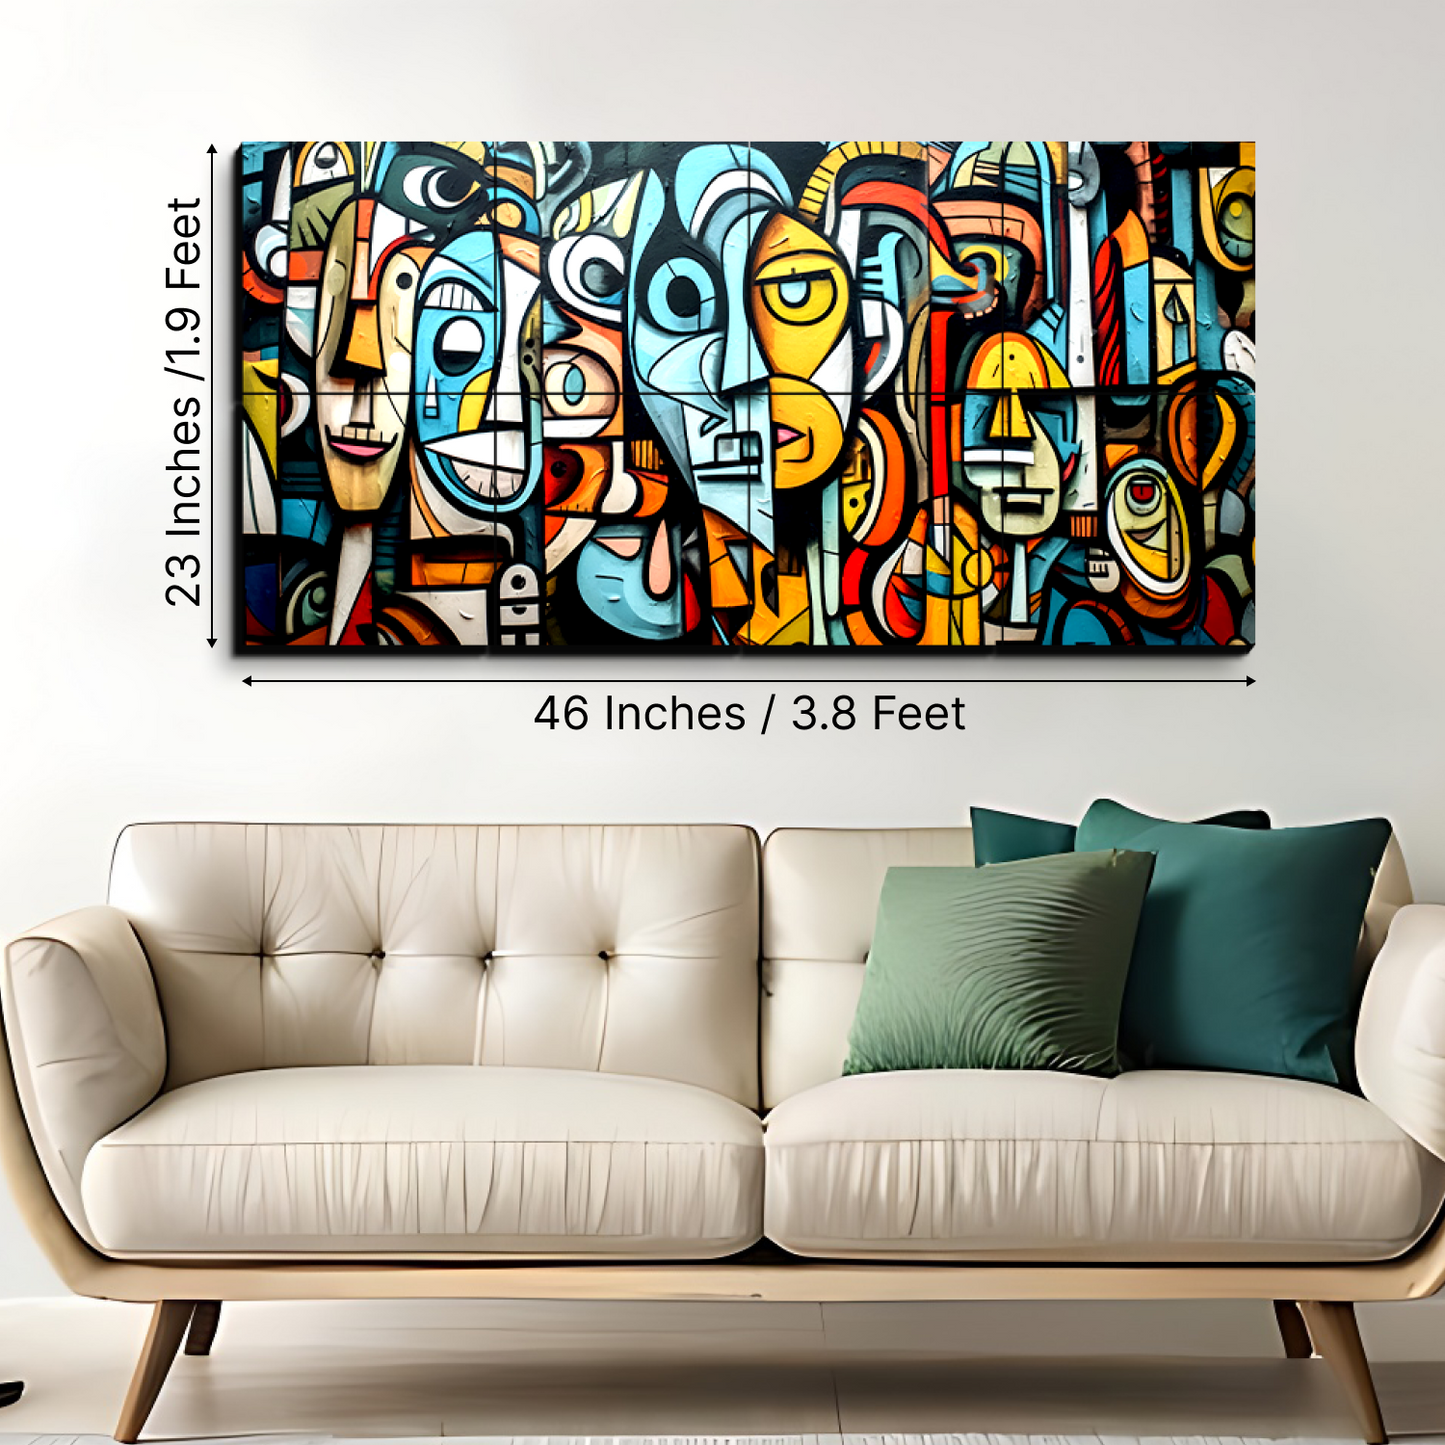 Infinite Faces Abstract Portrait Luxury Wall Tiles Set